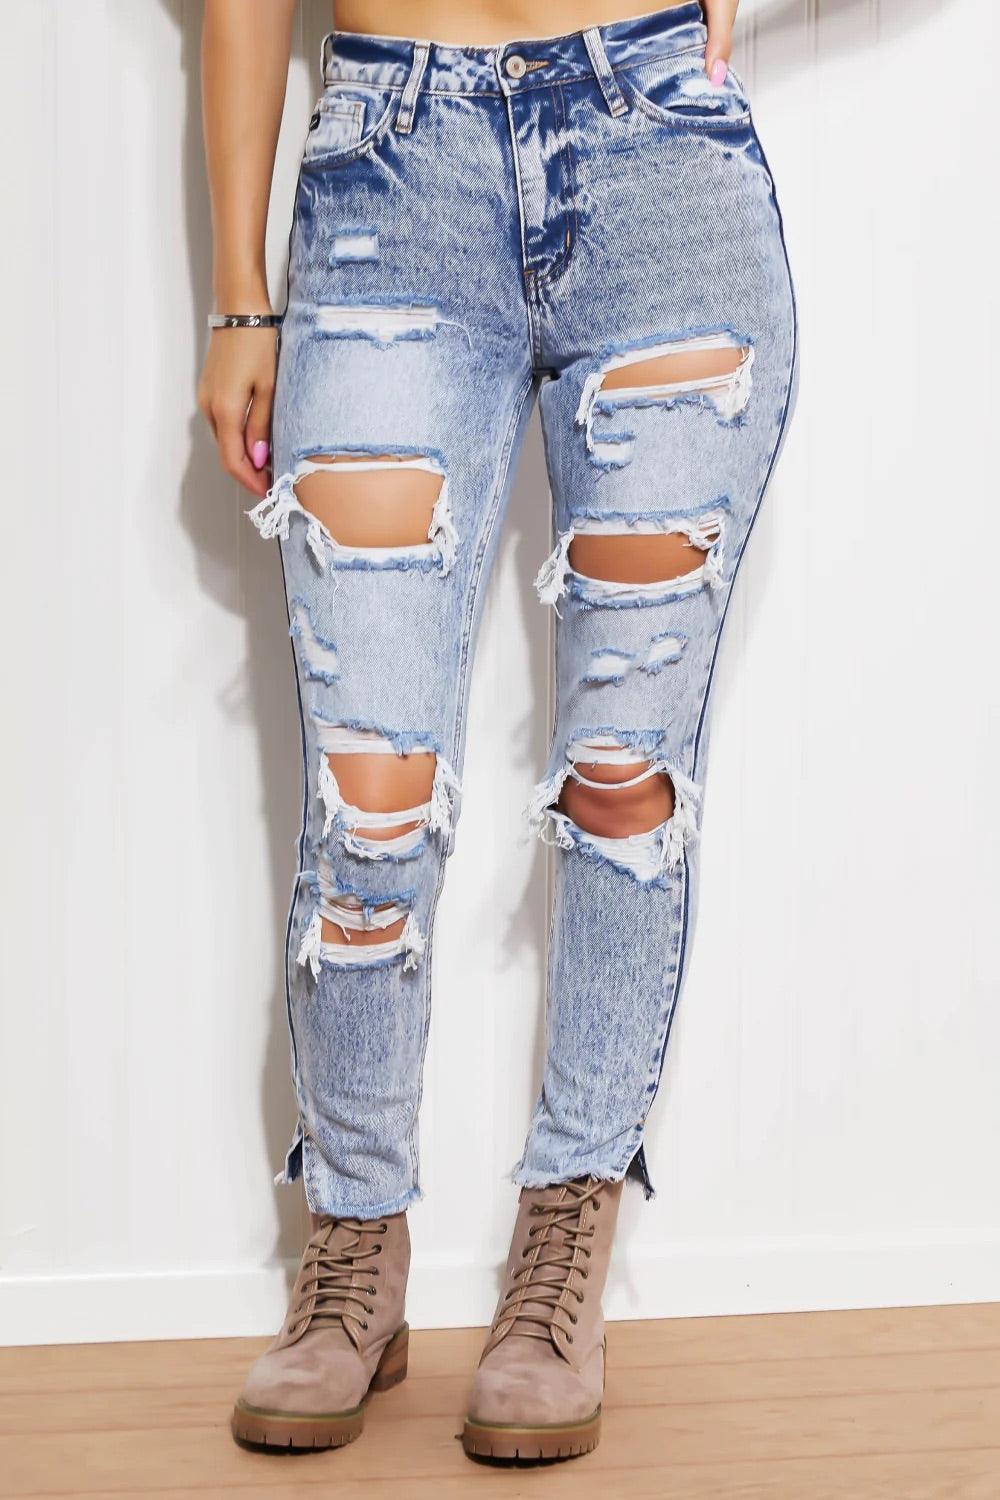 MOM JEANS-Relaxed fit, sit high on waist, loose around thighs, and tapered leg. - Studio 653